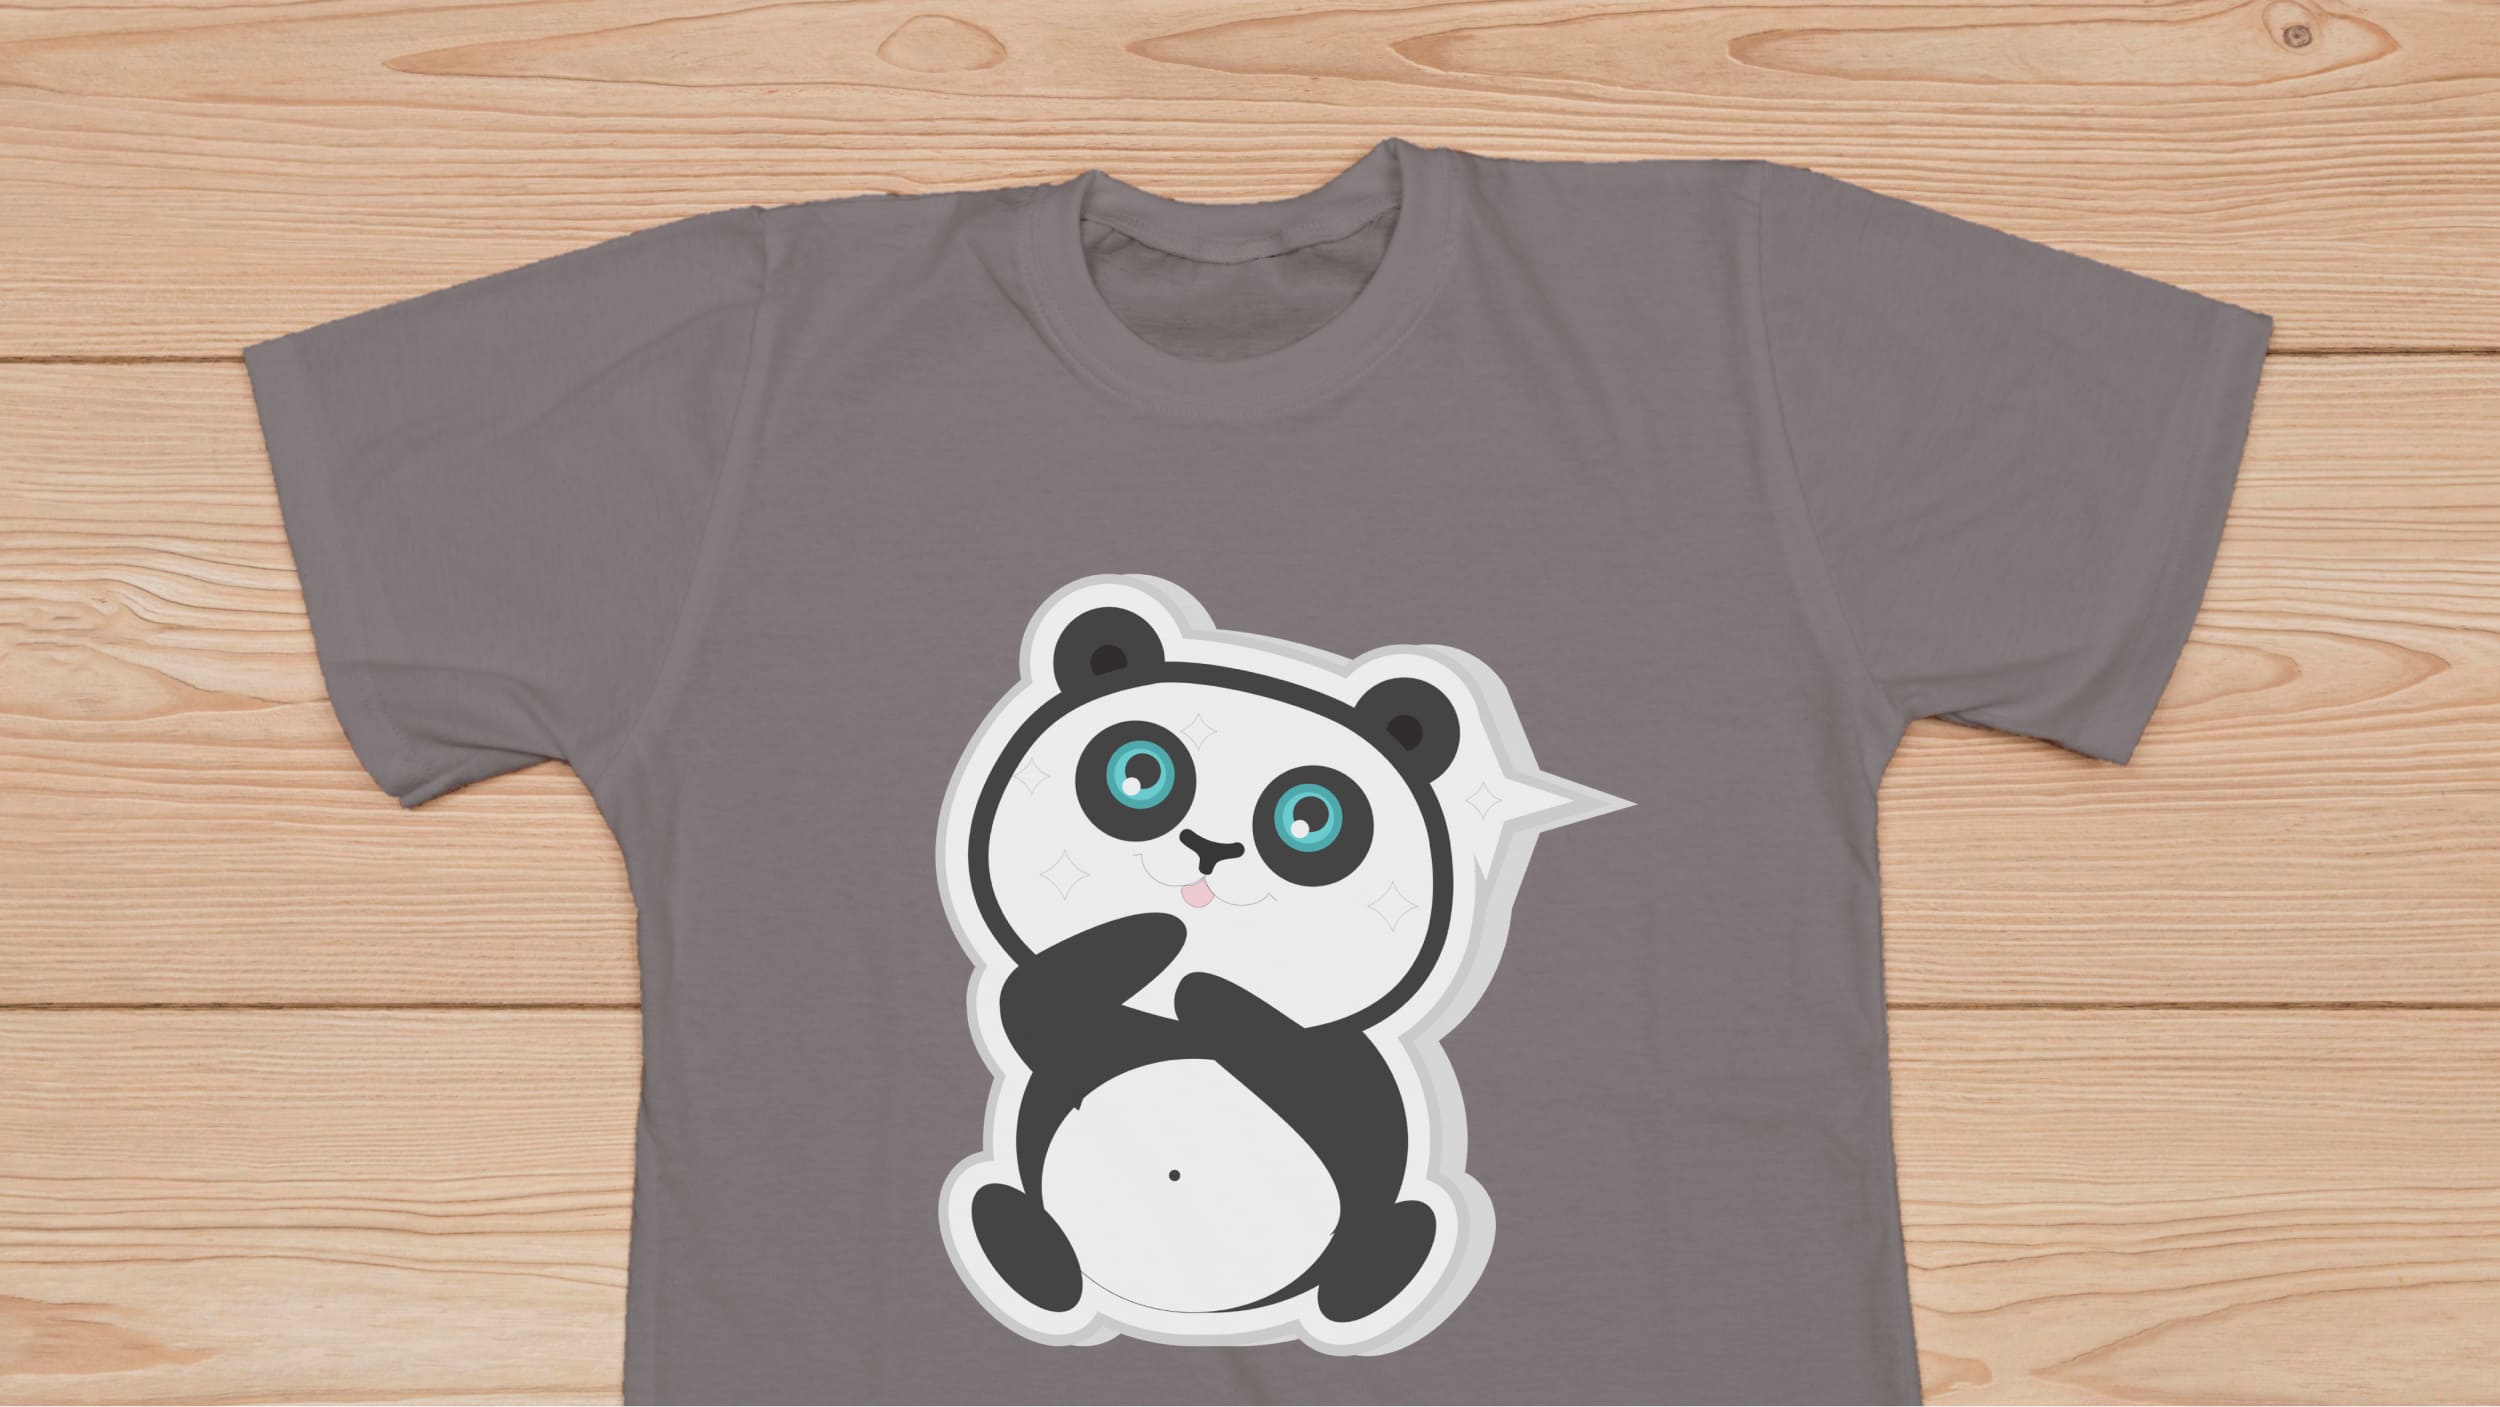 Gray t-shirt with dreamed panda bear on a wooden background.